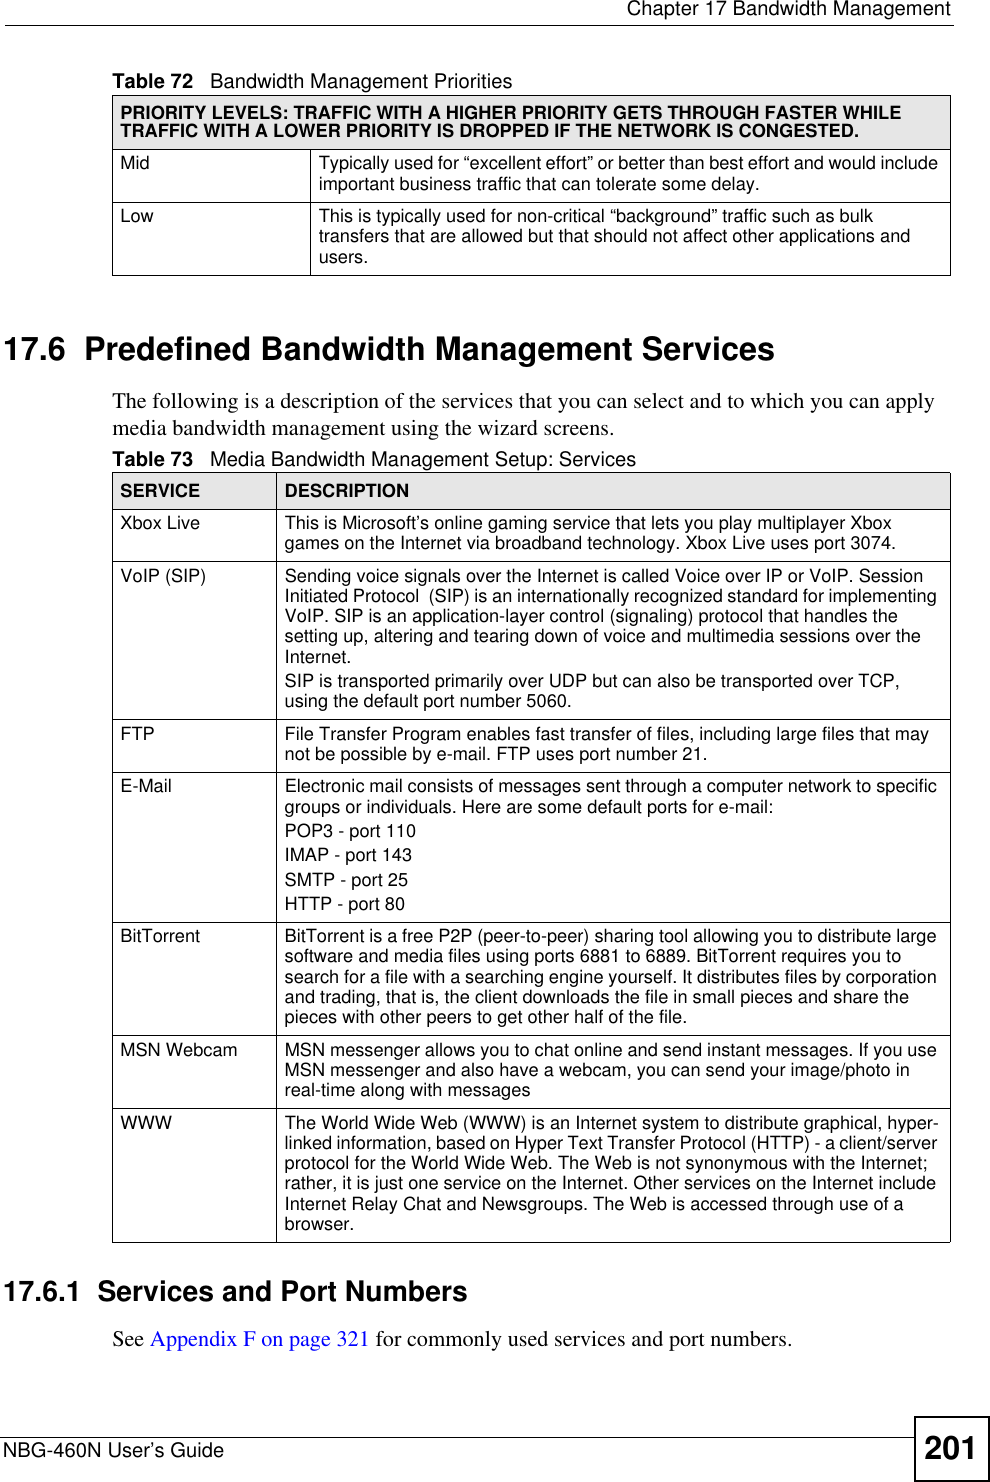  Chapter 17 Bandwidth ManagementNBG-460N User’s Guide 20117.6  Predefined Bandwidth Management ServicesThe following is a description of the services that you can select and to which you can apply media bandwidth management using the wizard screens. 17.6.1  Services and Port NumbersSee Appendix F on page 321 for commonly used services and port numbers.Mid  Typically used for “excellent effort” or better than best effort and would include important business traffic that can tolerate some delay.Low This is typically used for non-critical “background” traffic such as bulk transfers that are allowed but that should not affect other applications and users.Table 72   Bandwidth Management PrioritiesPRIORITY LEVELS: TRAFFIC WITH A HIGHER PRIORITY GETS THROUGH FASTER WHILE TRAFFIC WITH A LOWER PRIORITY IS DROPPED IF THE NETWORK IS CONGESTED.Table 73   Media Bandwidth Management Setup: ServicesSERVICE DESCRIPTIONXbox Live This is Microsoft’s online gaming service that lets you play multiplayer Xbox games on the Internet via broadband technology. Xbox Live uses port 3074.VoIP (SIP) Sending voice signals over the Internet is called Voice over IP or VoIP. Session Initiated Protocol  (SIP) is an internationally recognized standard for implementing VoIP. SIP is an application-layer control (signaling) protocol that handles the setting up, altering and tearing down of voice and multimedia sessions over the Internet.SIP is transported primarily over UDP but can also be transported over TCP, using the default port number 5060. FTP File Transfer Program enables fast transfer of files, including large files that may not be possible by e-mail. FTP uses port number 21.E-Mail Electronic mail consists of messages sent through a computer network to specific groups or individuals. Here are some default ports for e-mail: POP3 - port 110IMAP - port 143SMTP - port 25HTTP - port 80BitTorrent BitTorrent is a free P2P (peer-to-peer) sharing tool allowing you to distribute large software and media files using ports 6881 to 6889. BitTorrent requires you to search for a file with a searching engine yourself. It distributes files by corporation and trading, that is, the client downloads the file in small pieces and share the pieces with other peers to get other half of the file.MSN Webcam MSN messenger allows you to chat online and send instant messages. If you use MSN messenger and also have a webcam, you can send your image/photo in real-time along with messagesWWW The World Wide Web (WWW) is an Internet system to distribute graphical, hyper-linked information, based on Hyper Text Transfer Protocol (HTTP) - a client/server protocol for the World Wide Web. The Web is not synonymous with the Internet; rather, it is just one service on the Internet. Other services on the Internet include Internet Relay Chat and Newsgroups. The Web is accessed through use of a browser.